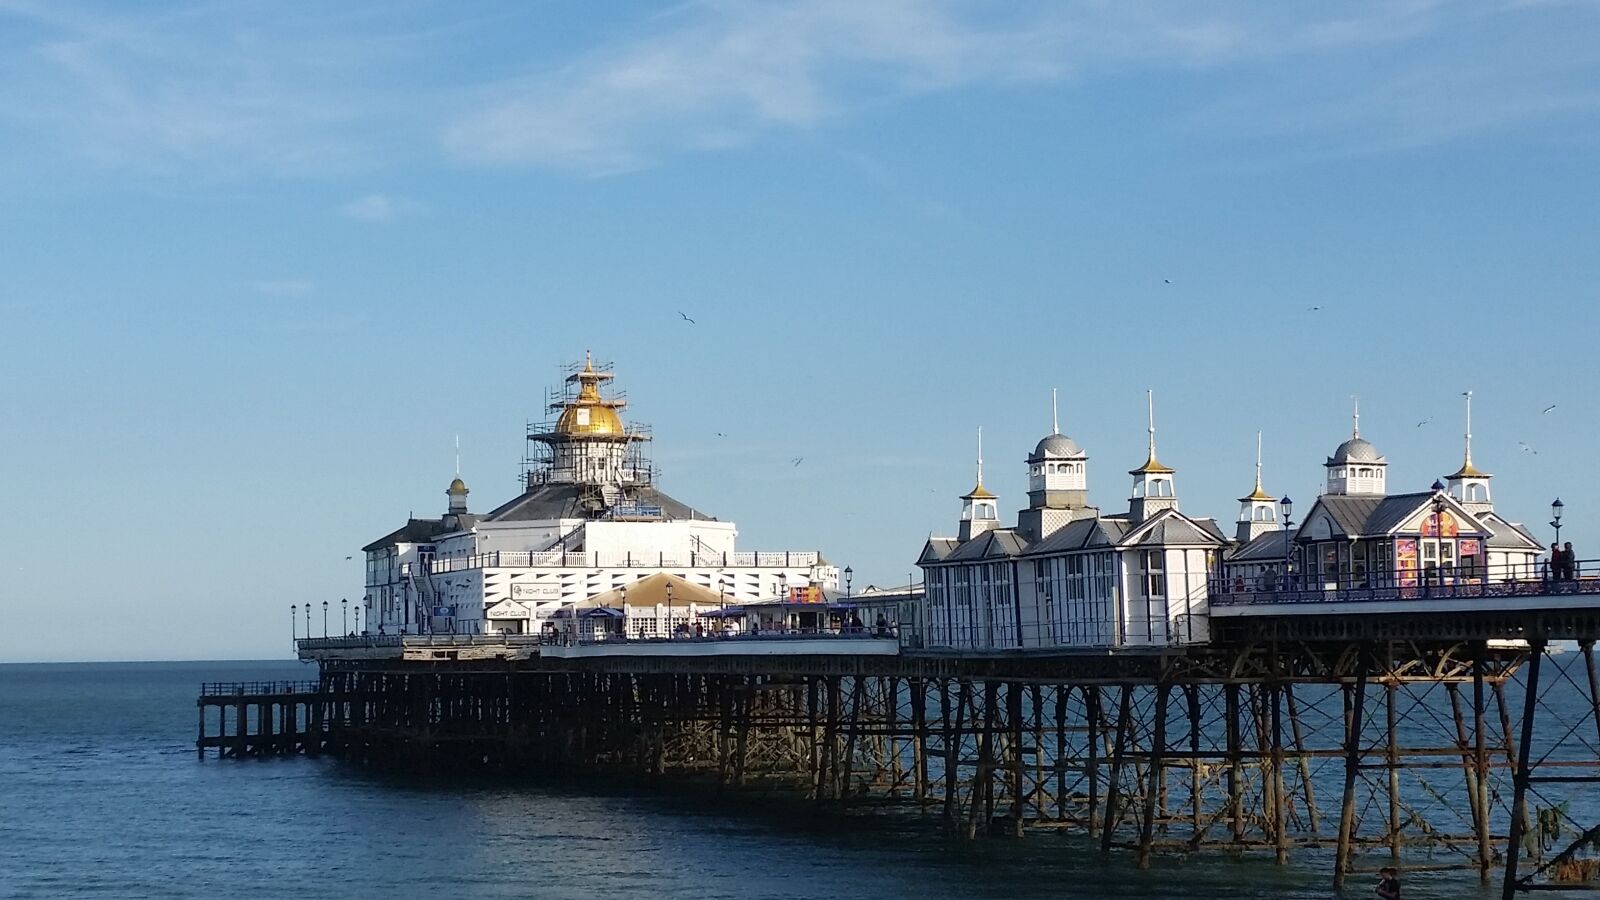 Samsung Galaxy S5 sample photo. Eastbourne, seaside, pier photography